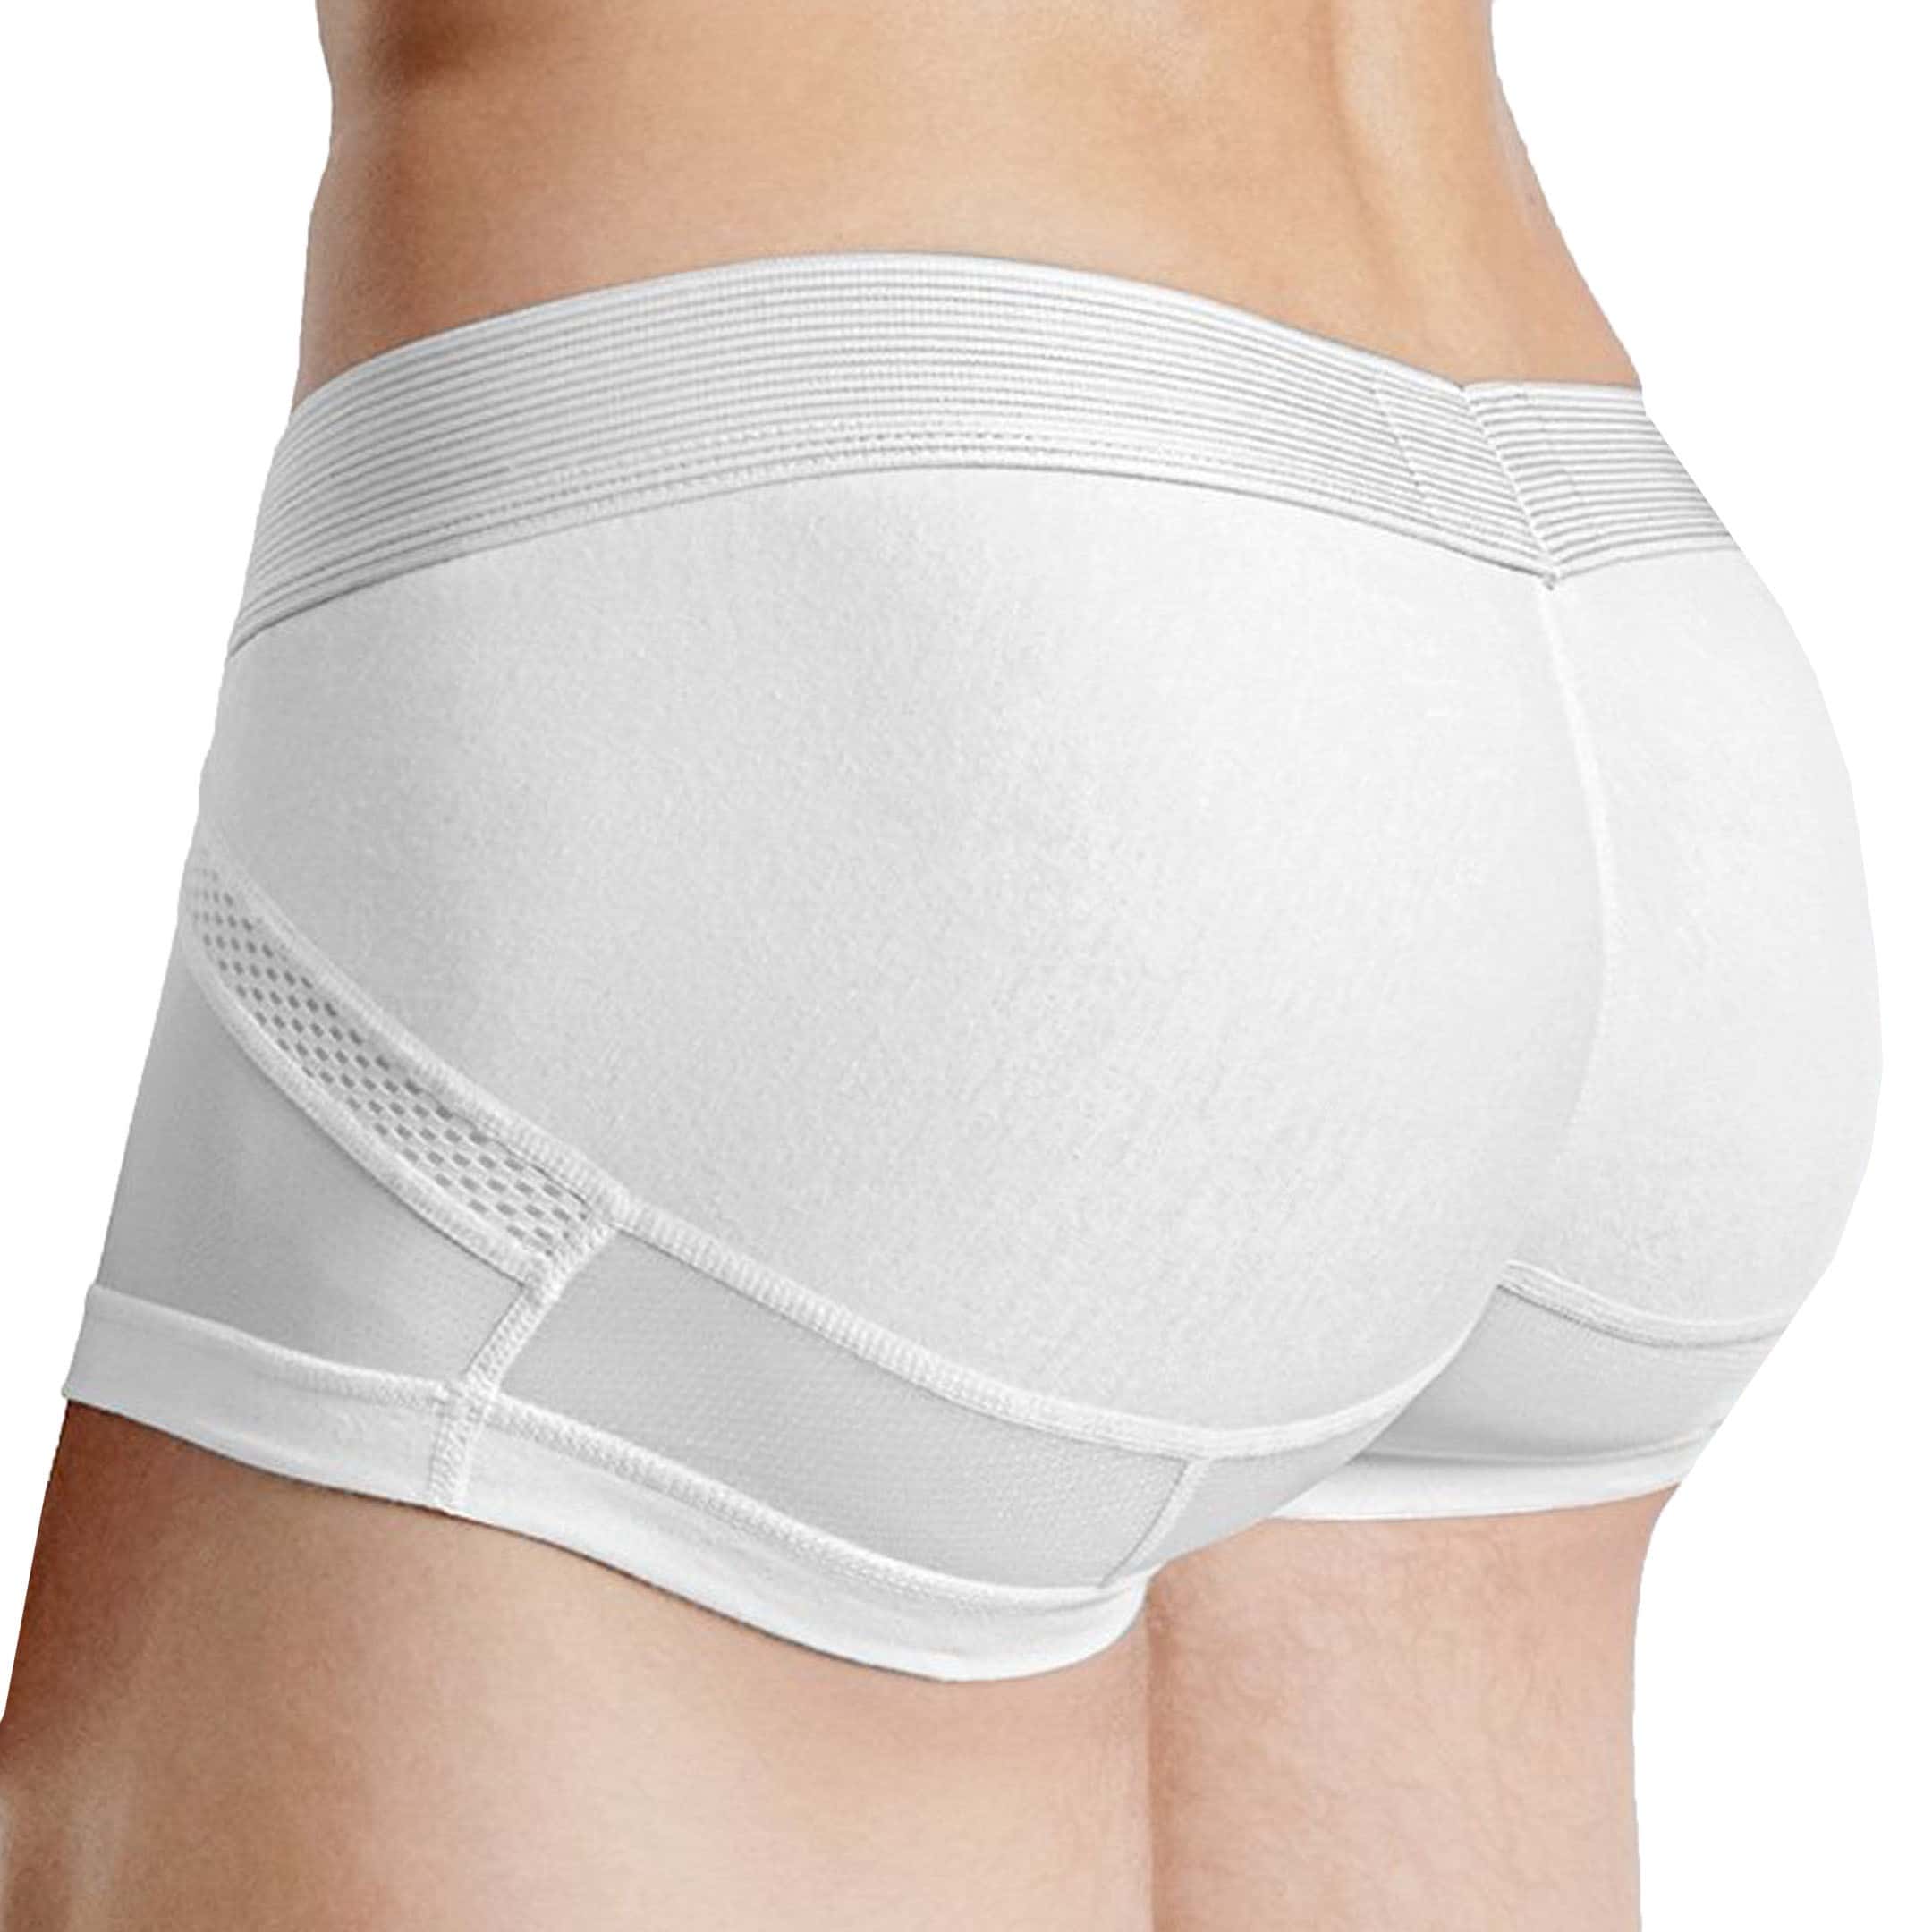 Tommy John Women's High Rise Briefs, 3 Pack, Second Skin Fabric